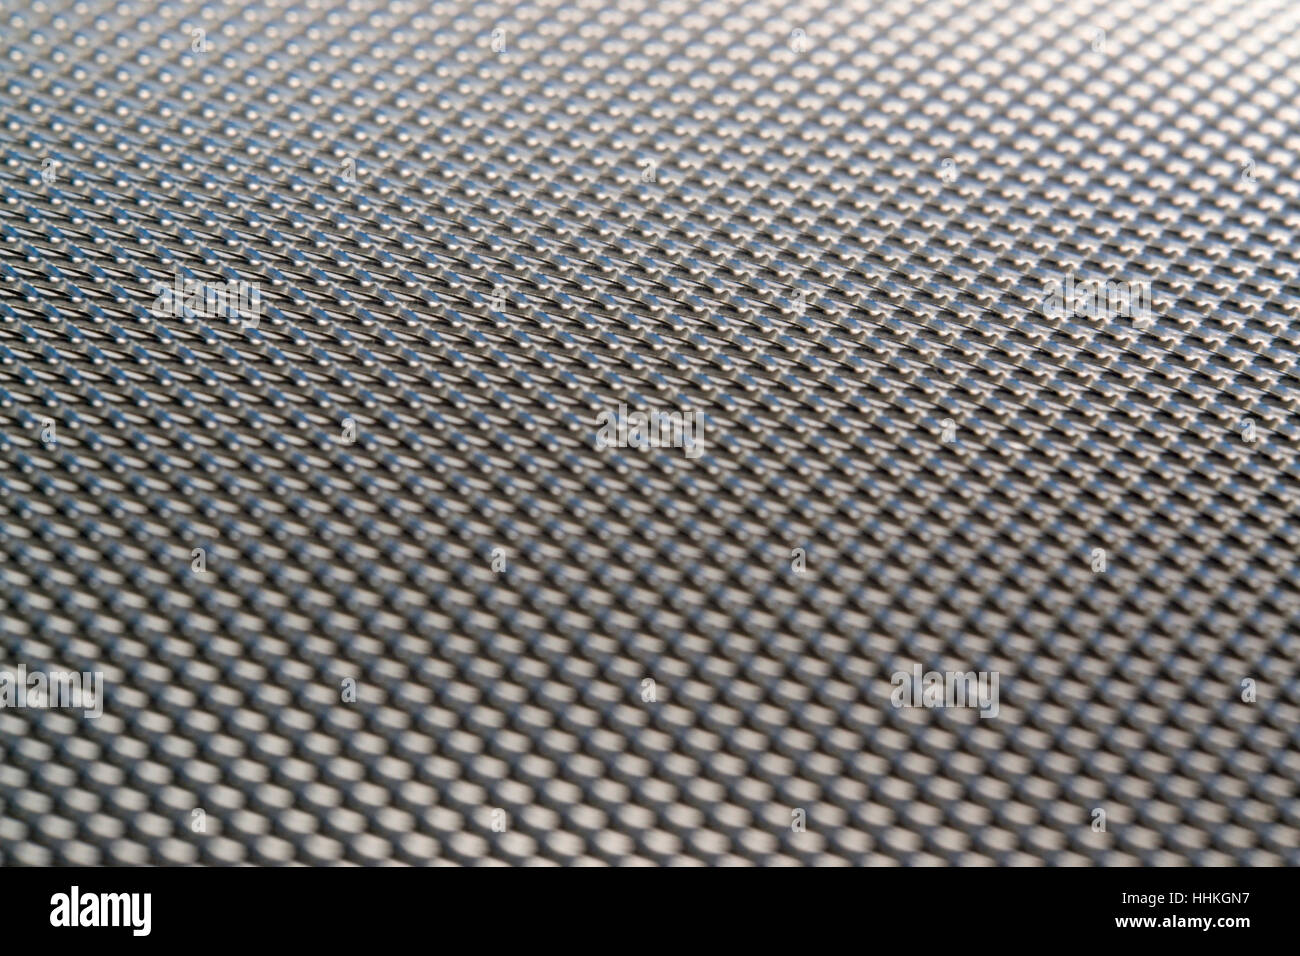 abstract background showing a fine metallic meshwork Stock Photo